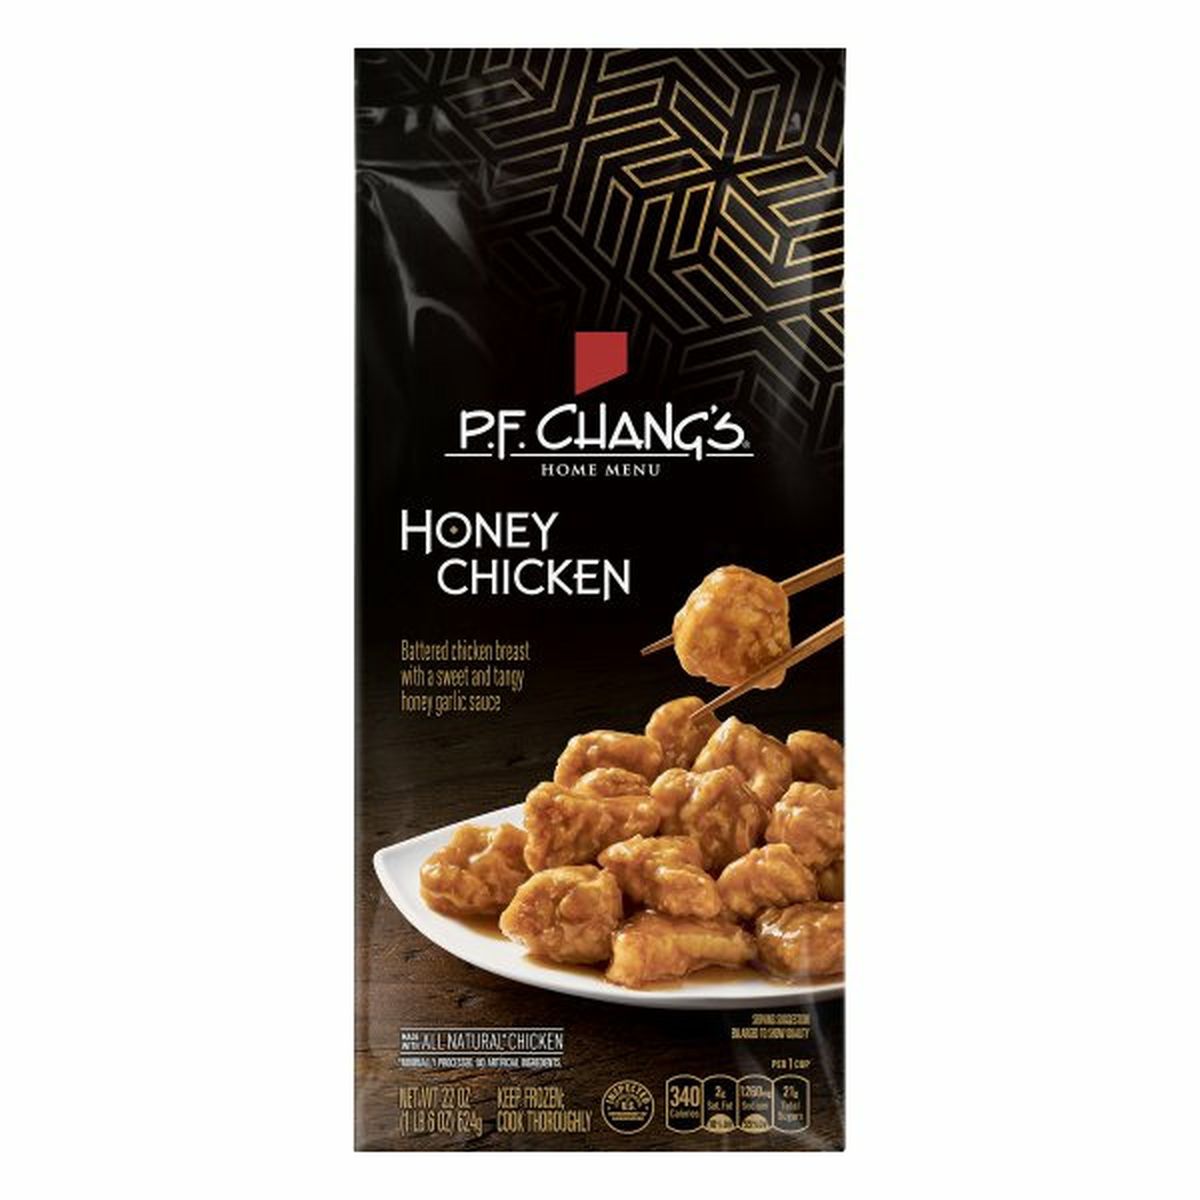 Calories in P.F. Chang's Honey Chicken